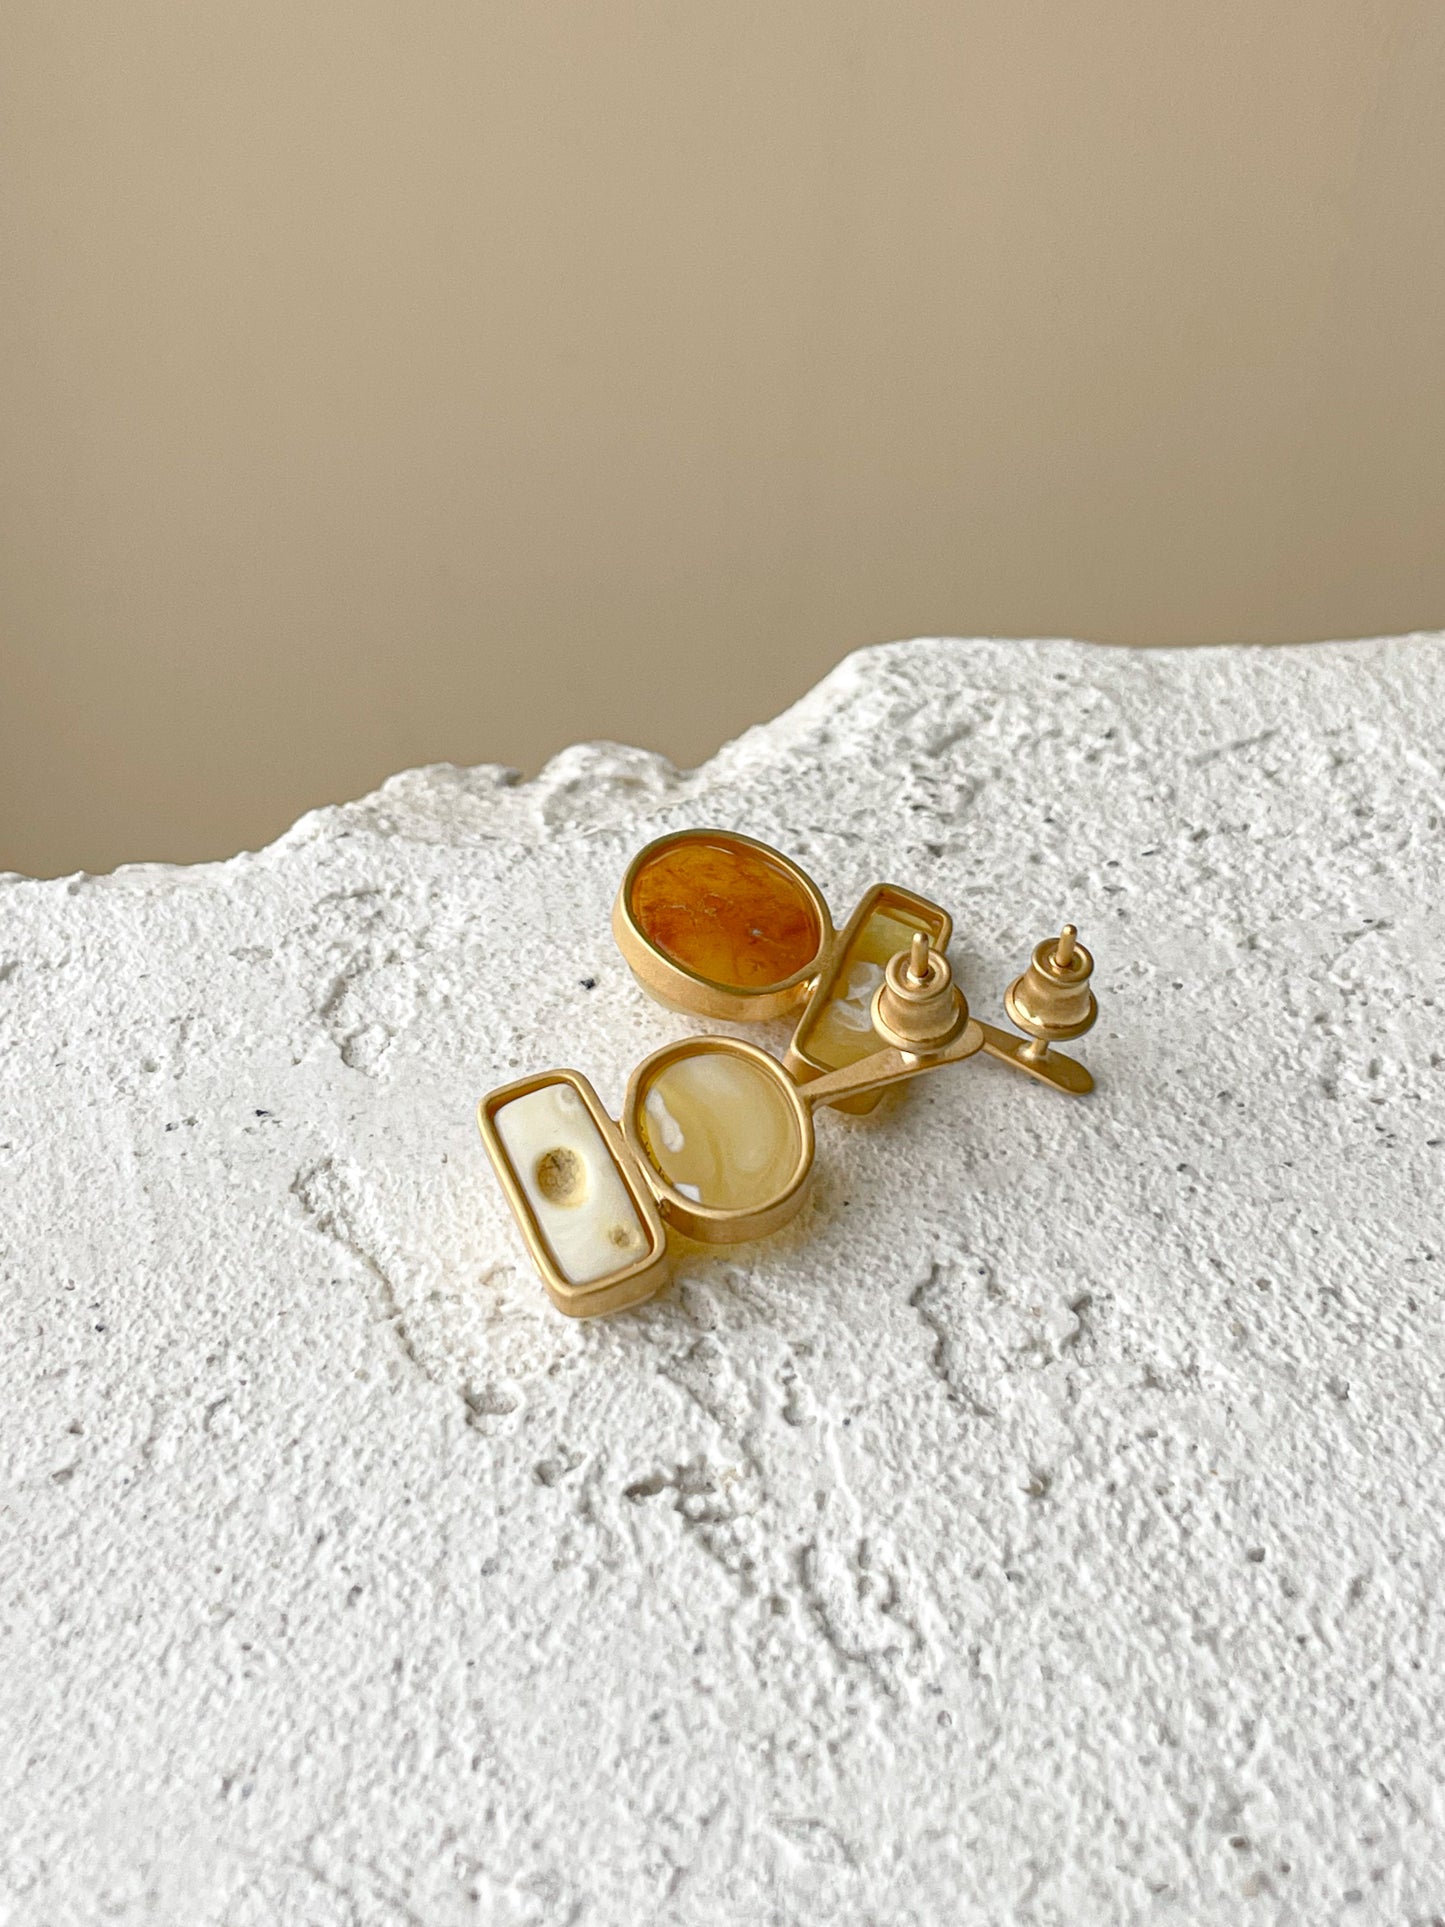 Amber stud earrings - Gold plated silver - Mismatched earrings collection